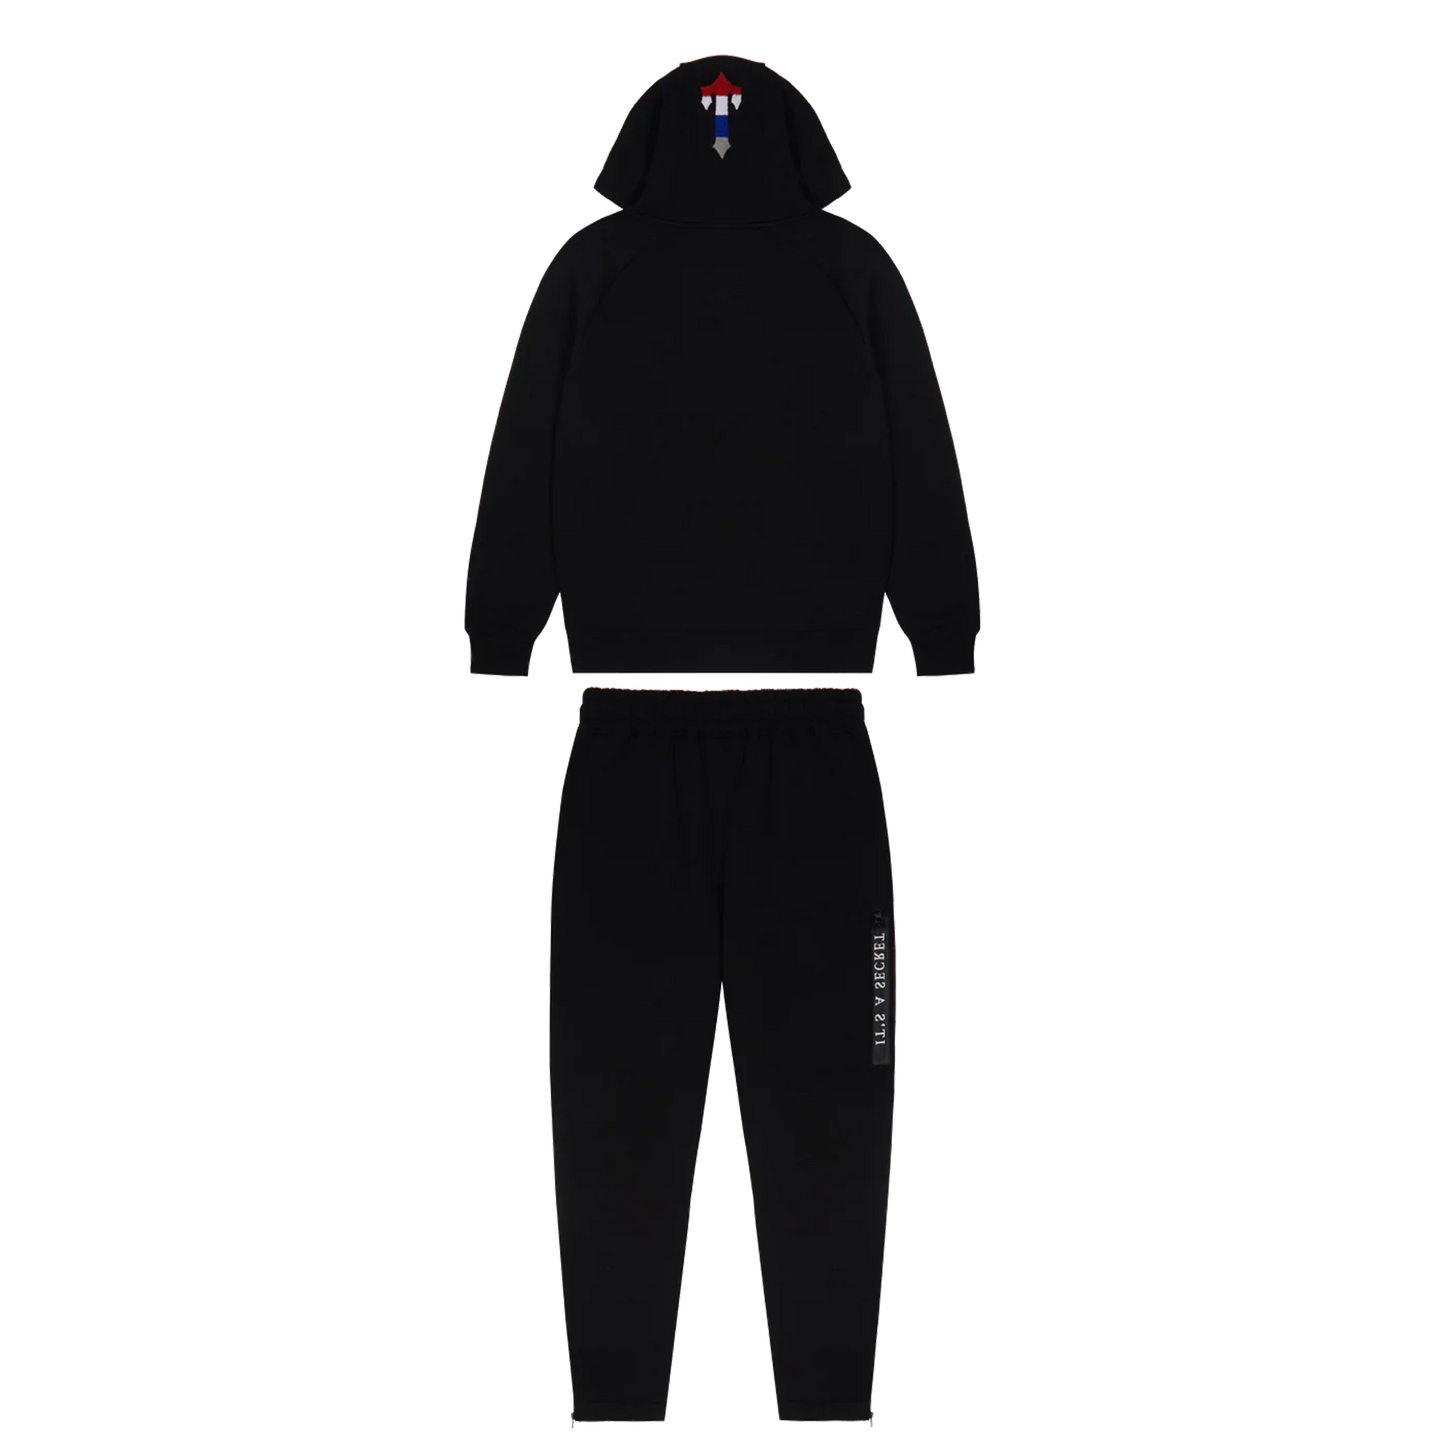 TRAPSTAR CHENILLE DECODED 2.0 HOODED TRACKSUIT-BLACK REVOLUTION EDITION